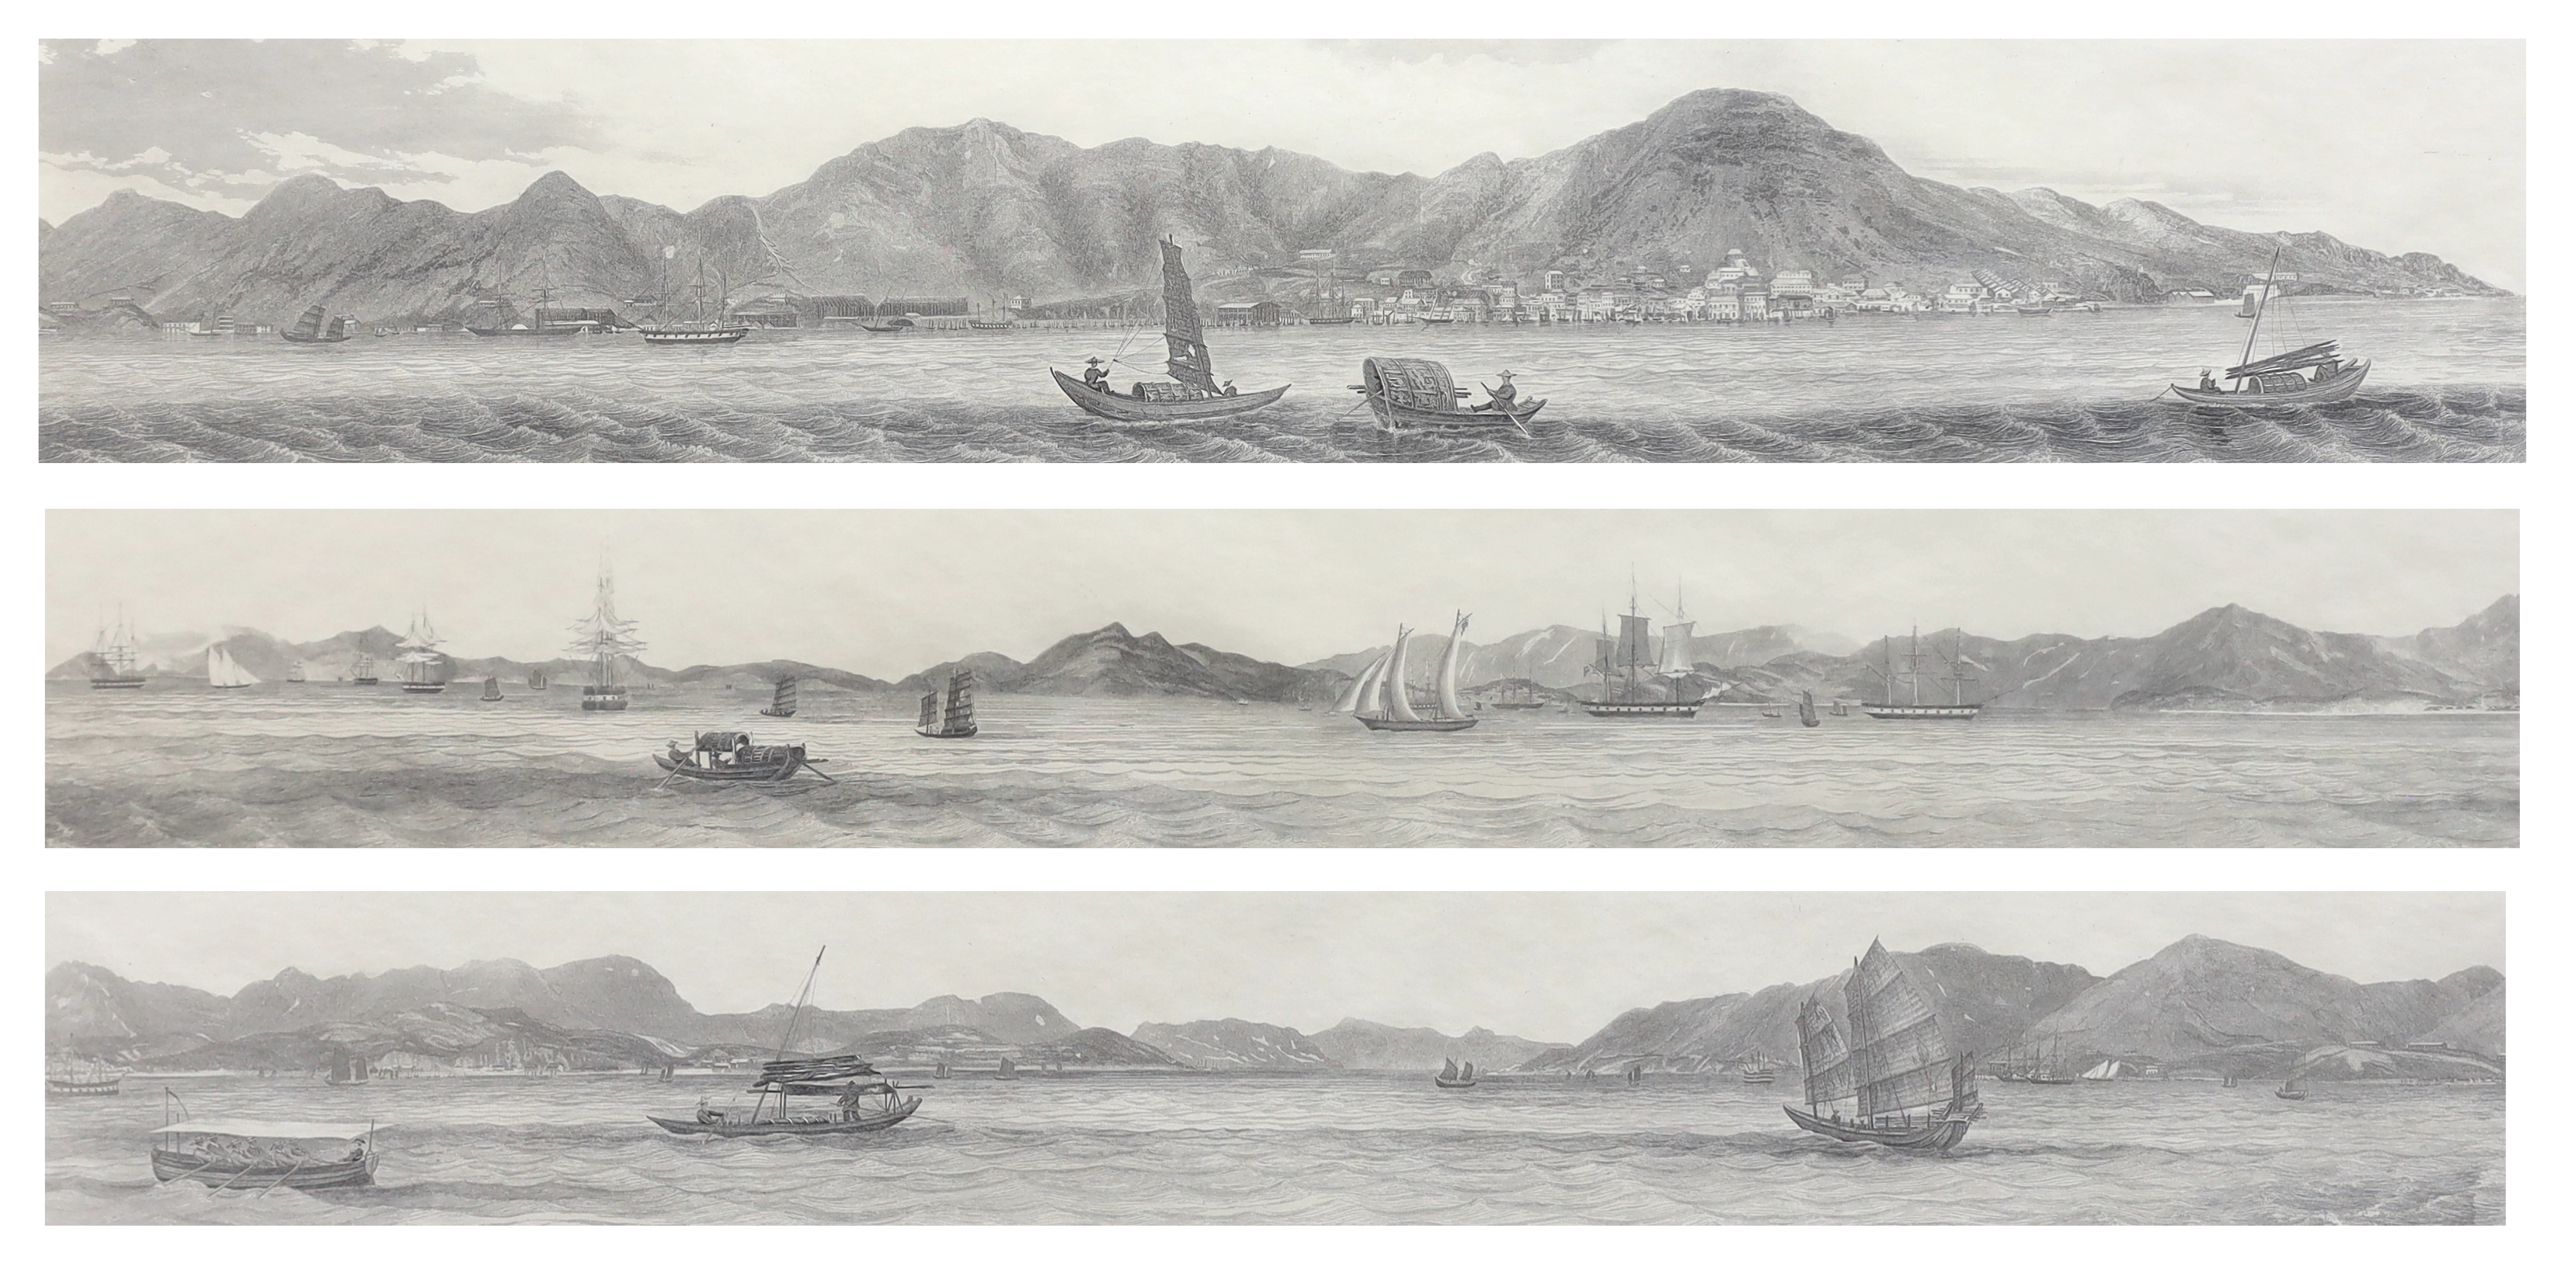 Lieutenant Leopold G. Heath for the Hydrographic Office, Hong Kong as seen from the anchorage of HMS Iris, 1846, set of three steel engravings, visible sheet 22 x 79cm